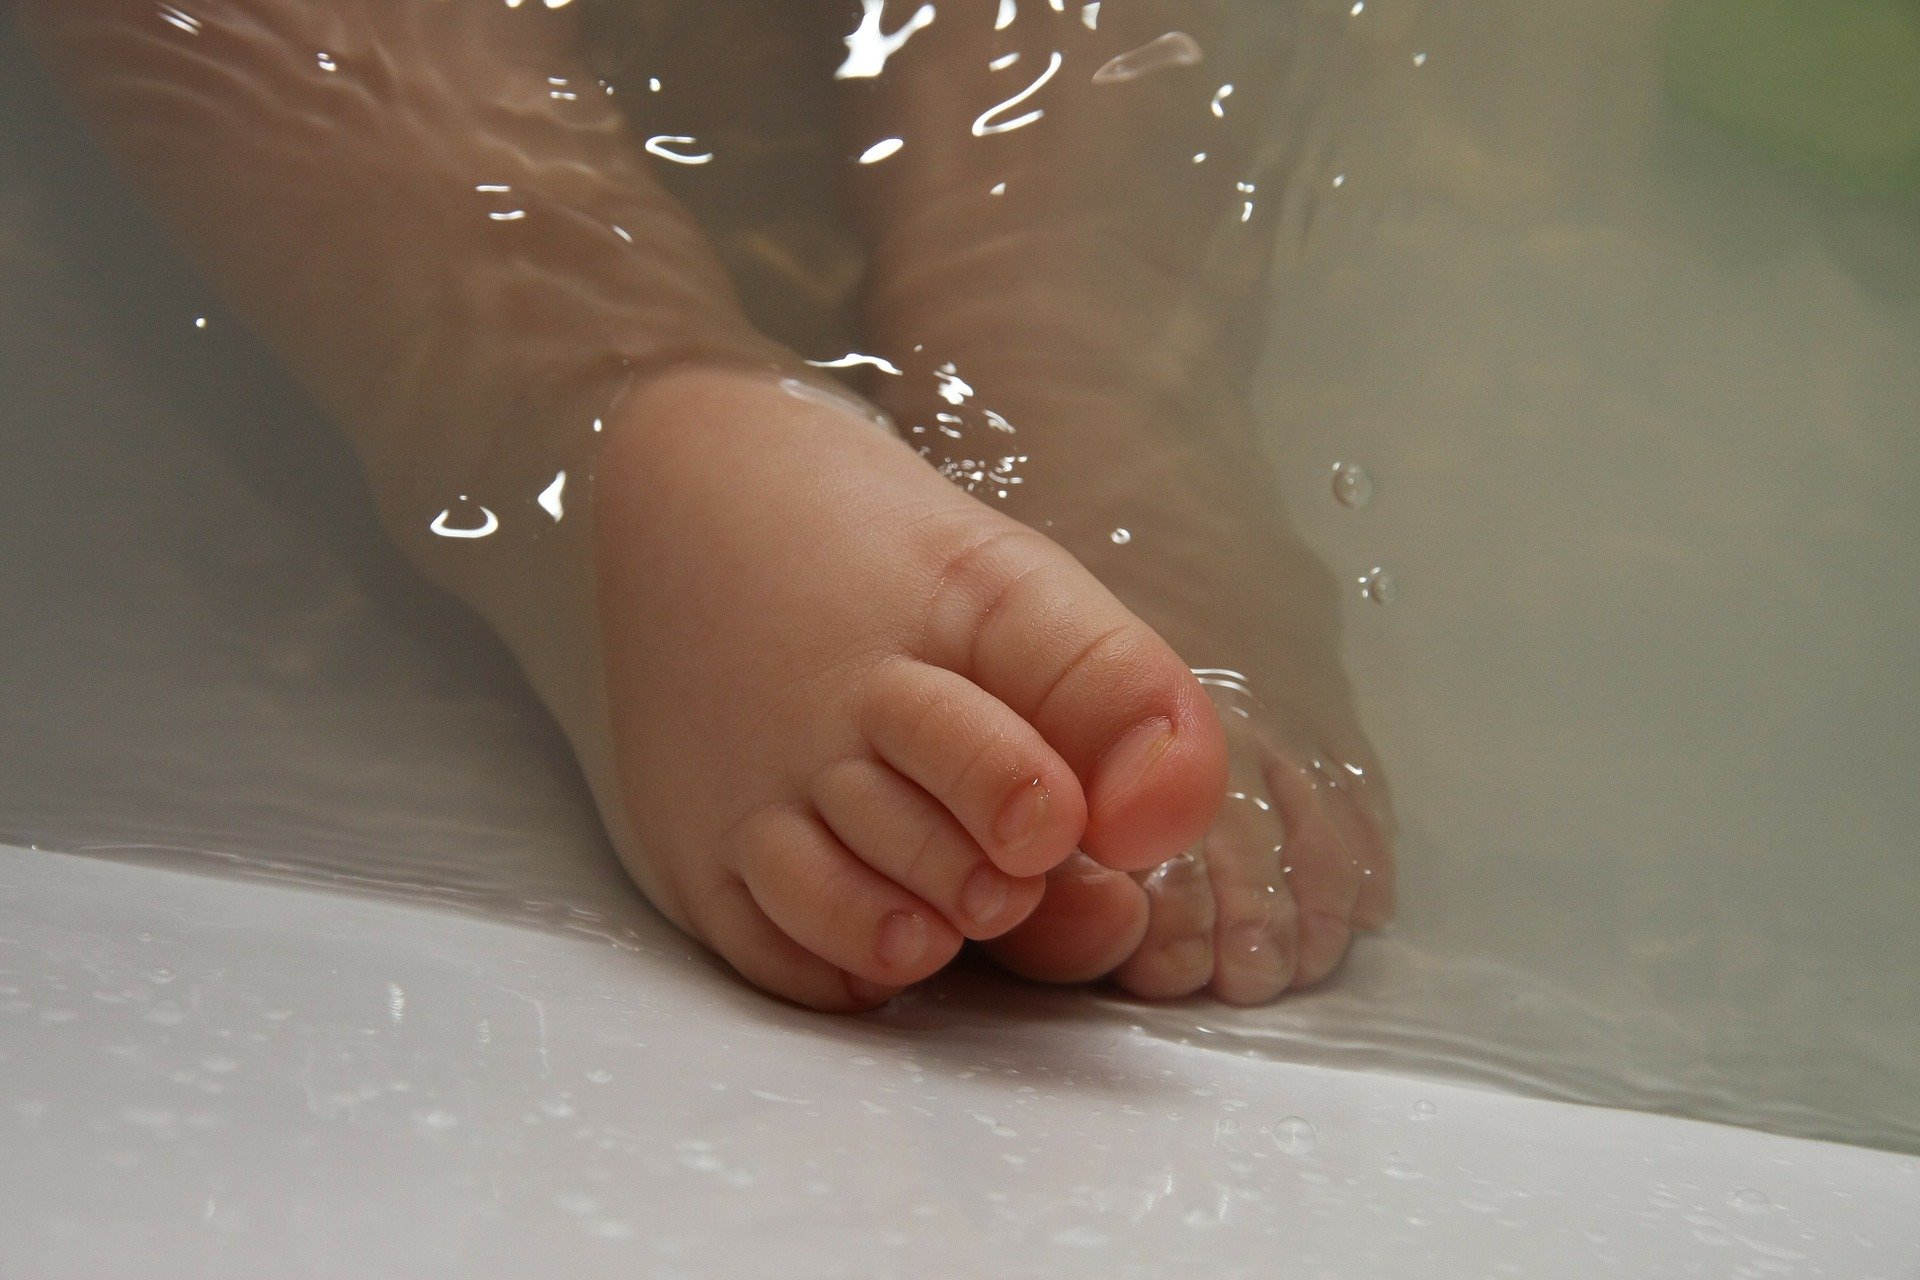 Baby feet in bath filled with water. | Photo: Pixabay/amyelizabethquinn